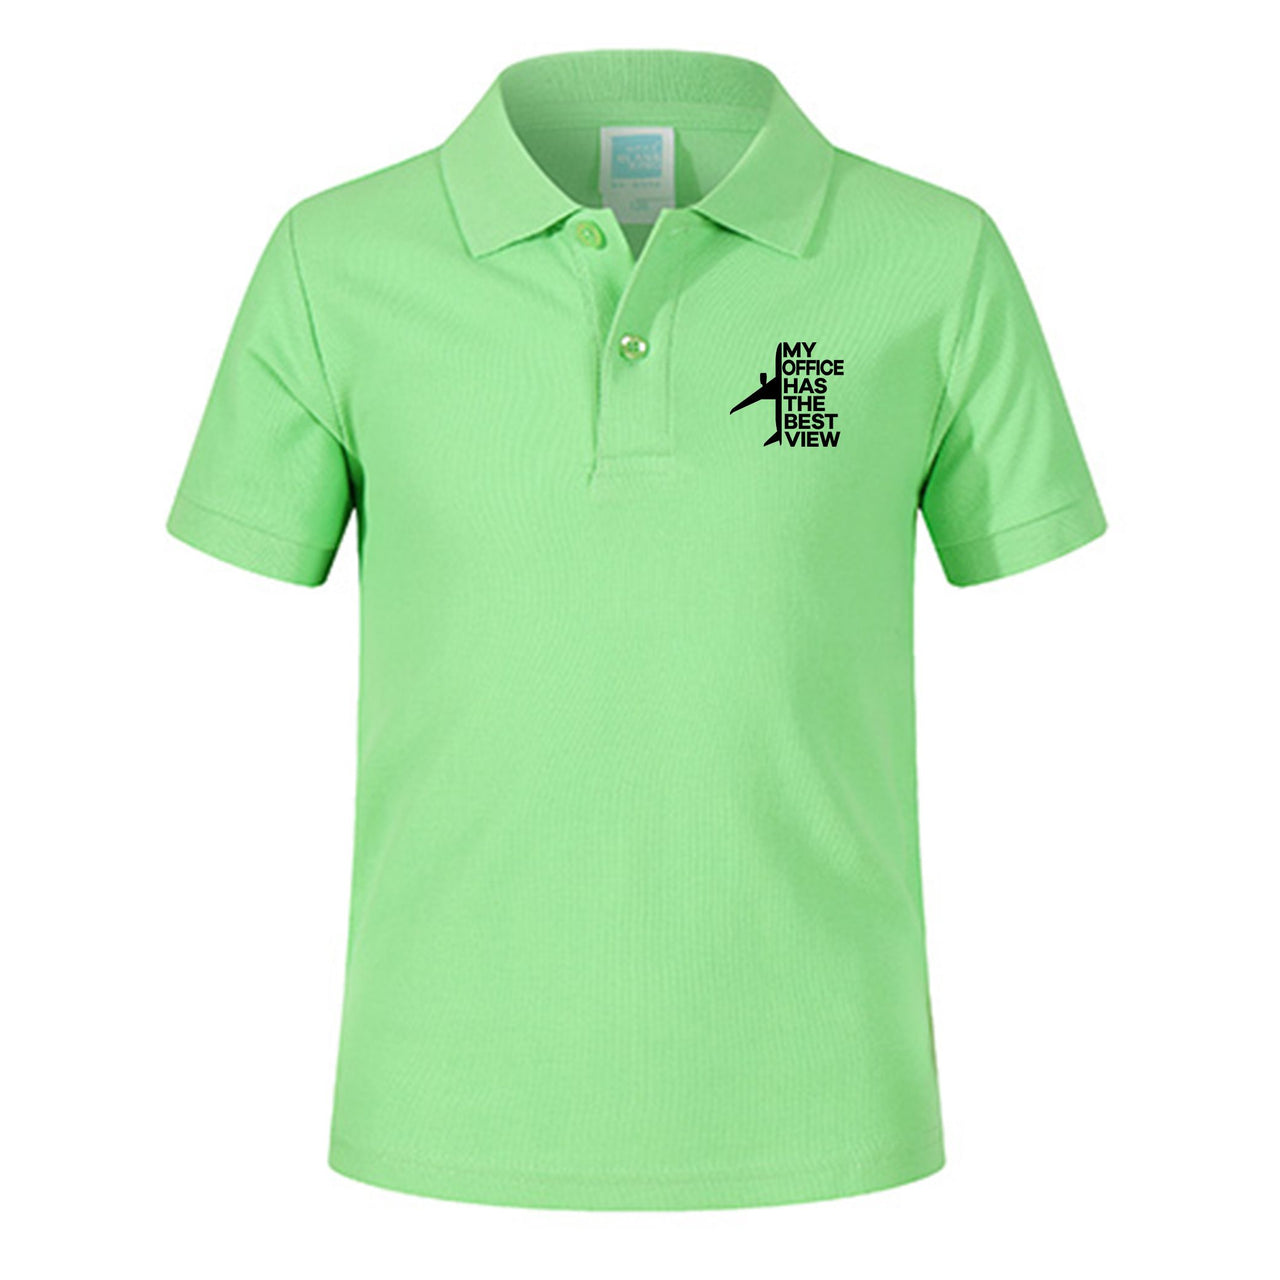 My Office Has The Best View Designed Children Polo T-Shirts